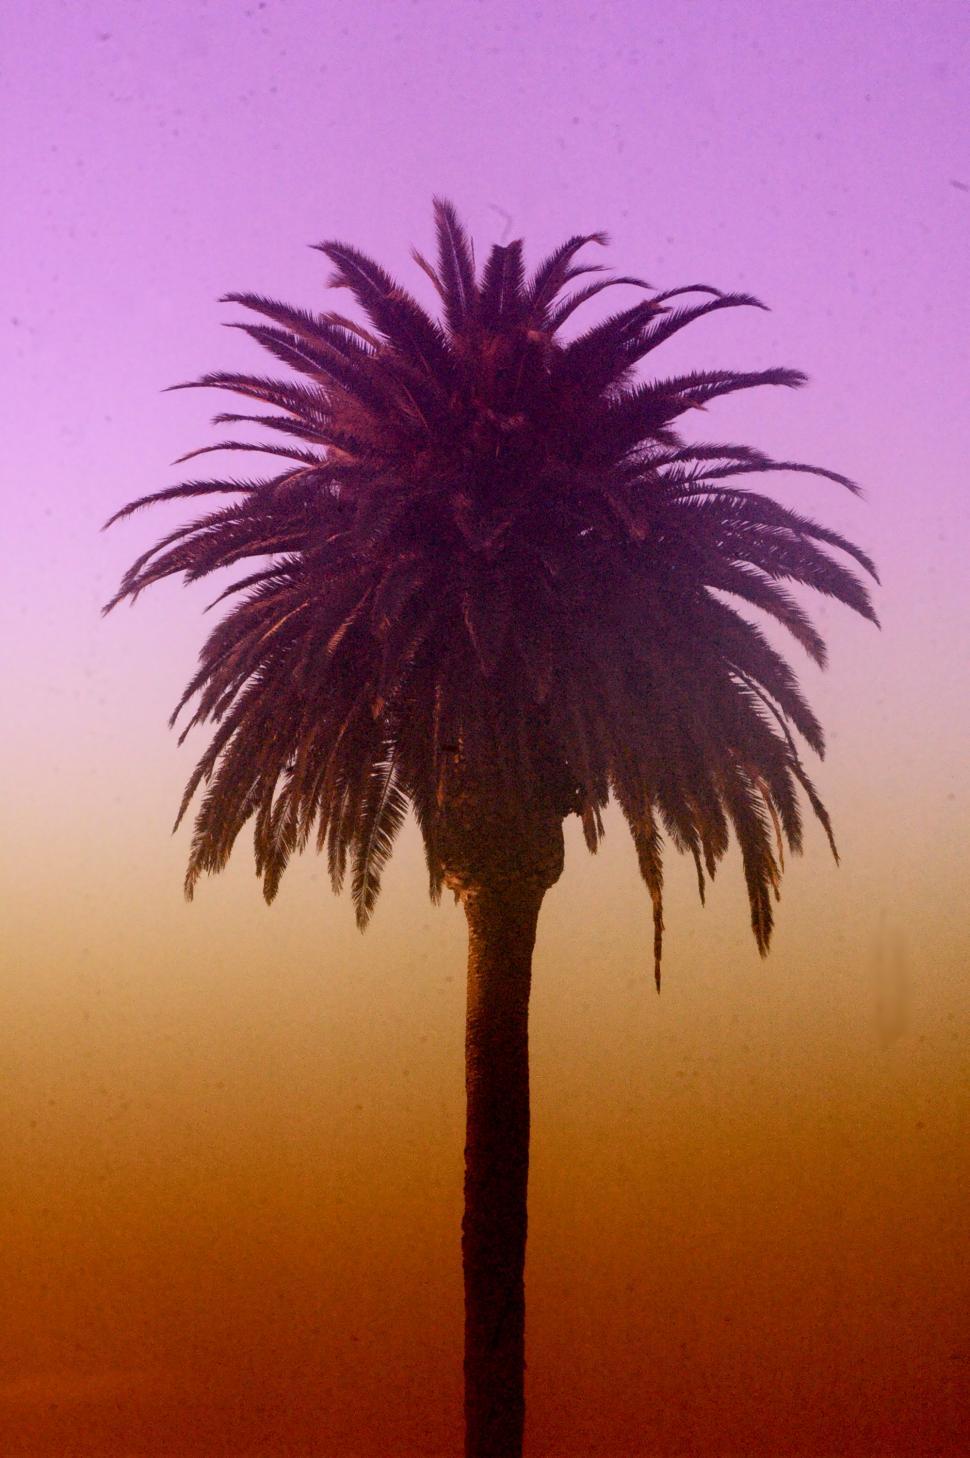 Free Image of Palm Tree Silhouette in the Colorful Sky 